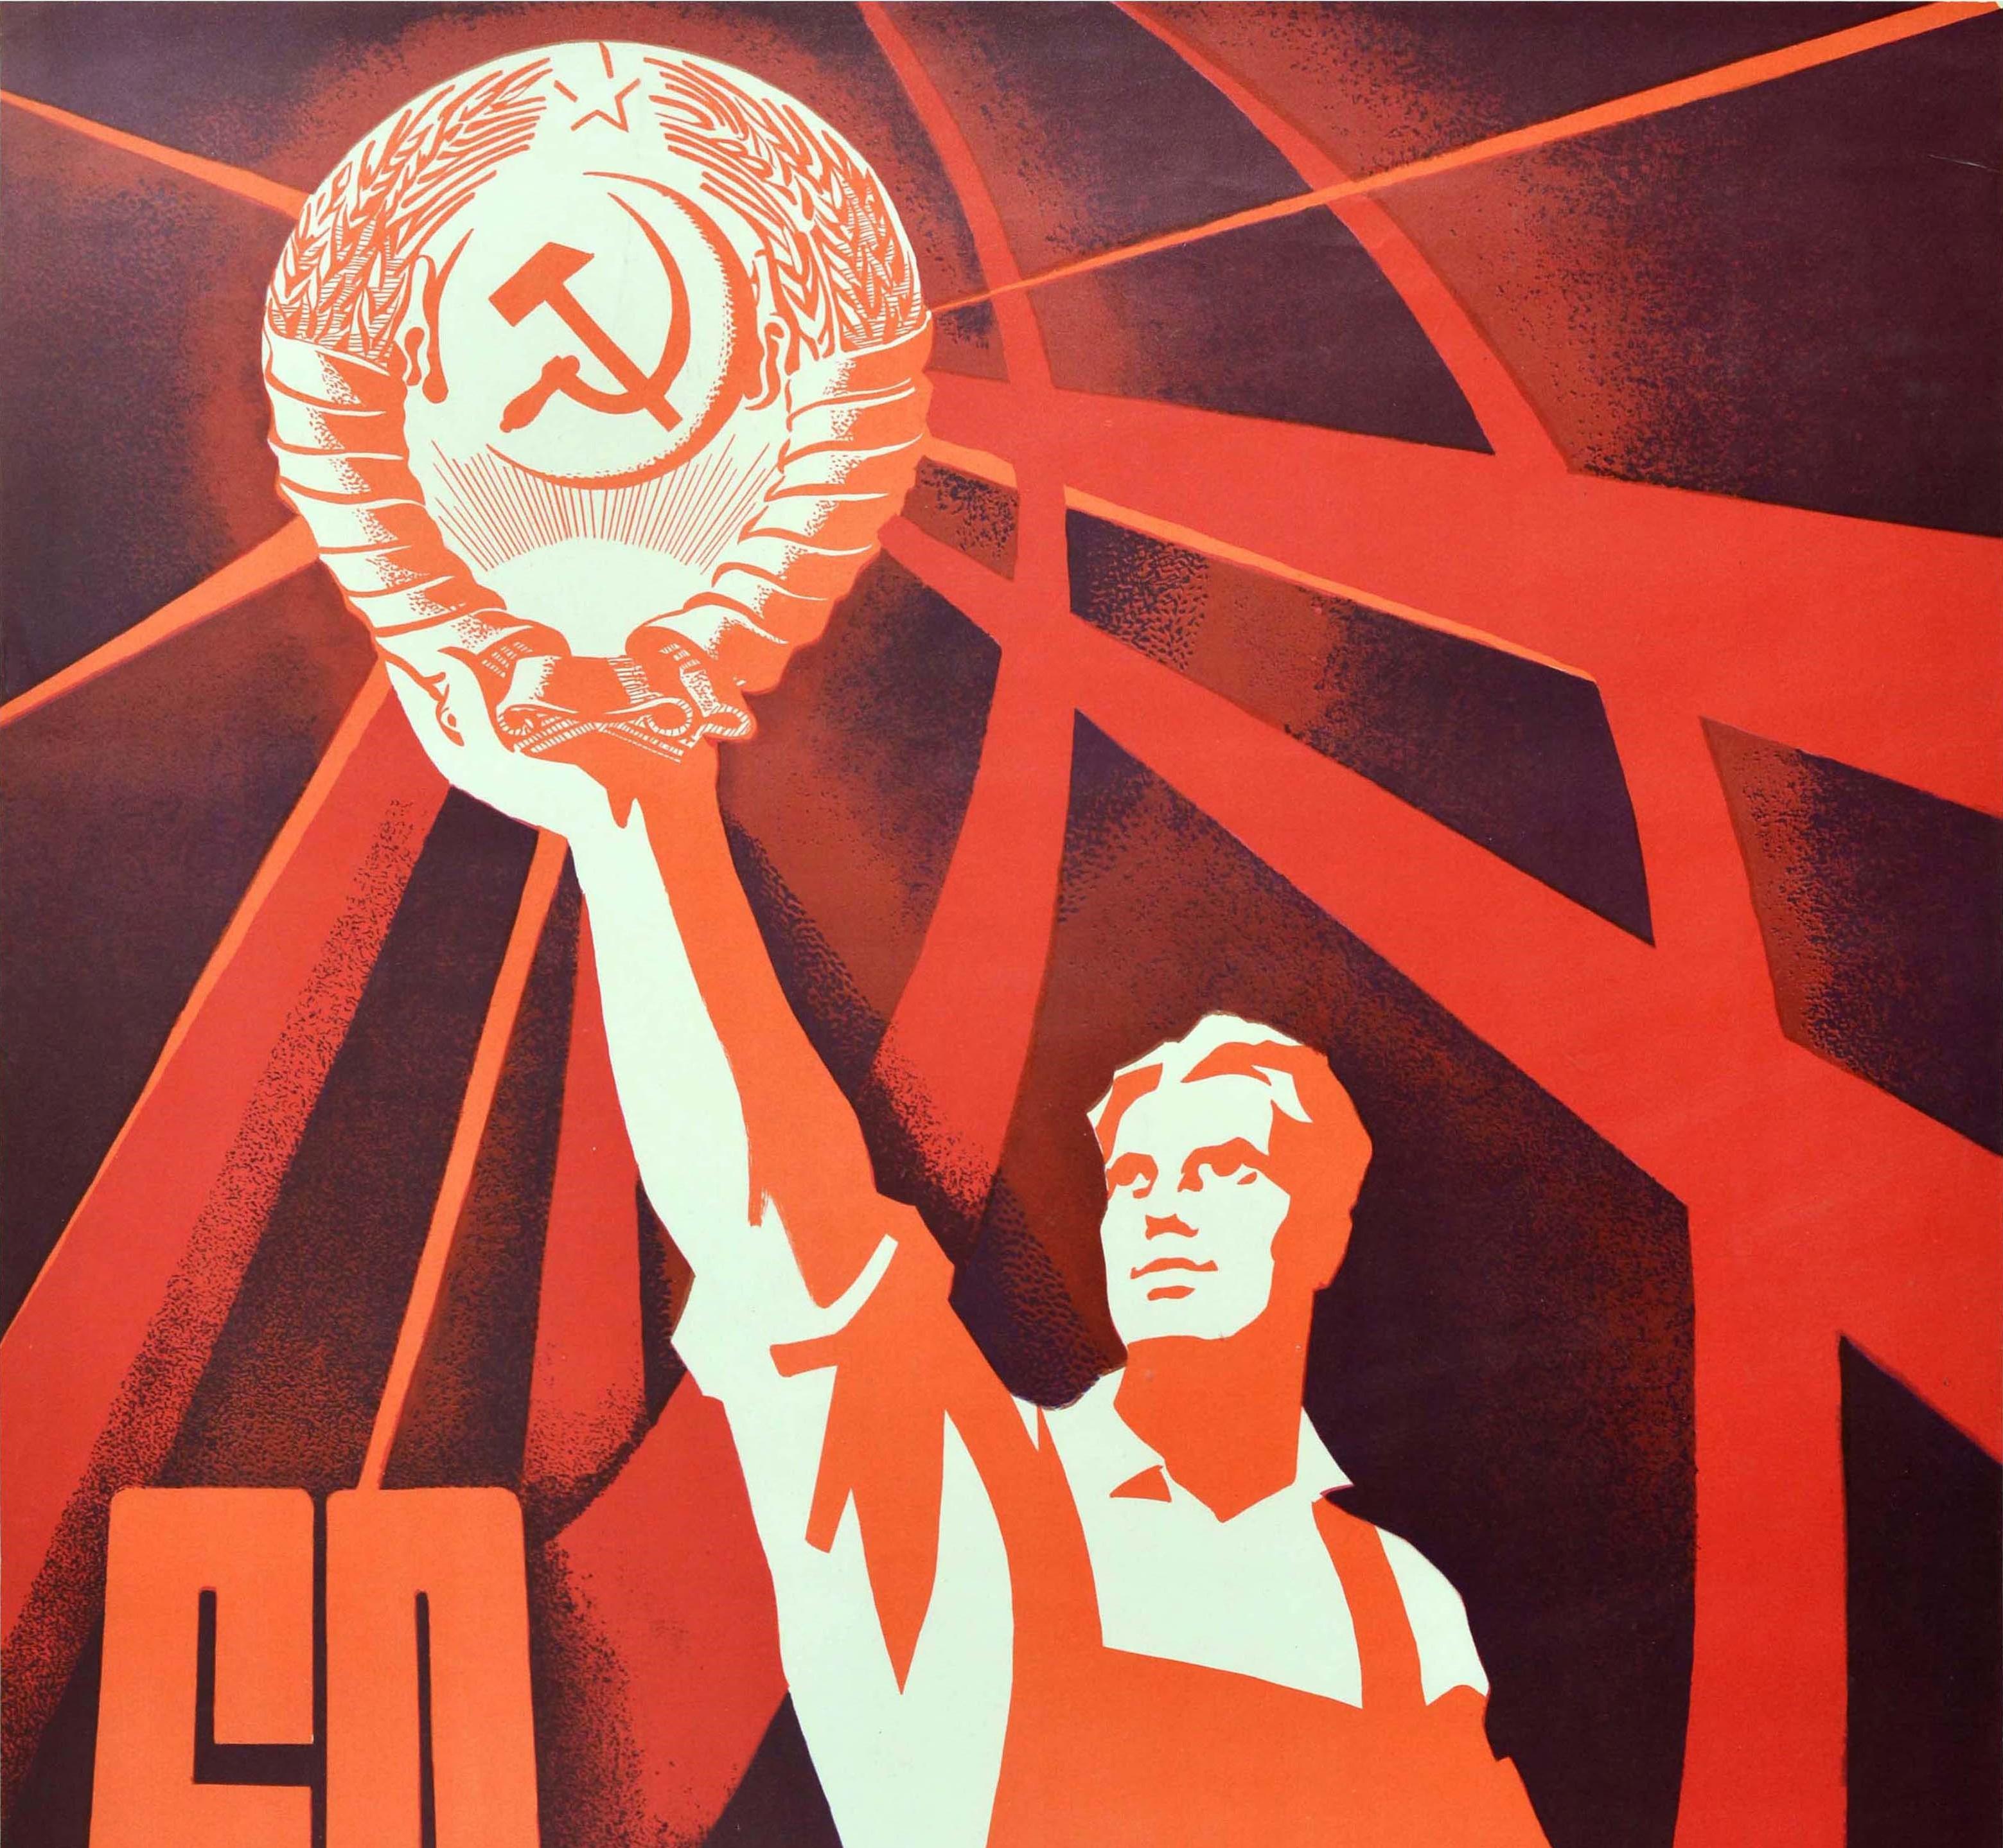 Original vintage Soviet propaganda poster commemorating the 60 year anniversary of the October Revolution - 60 ??? ??????? - featuring a bold design depicting a worker in overalls holding up the Communist emblem of a hammer and sickle inside a